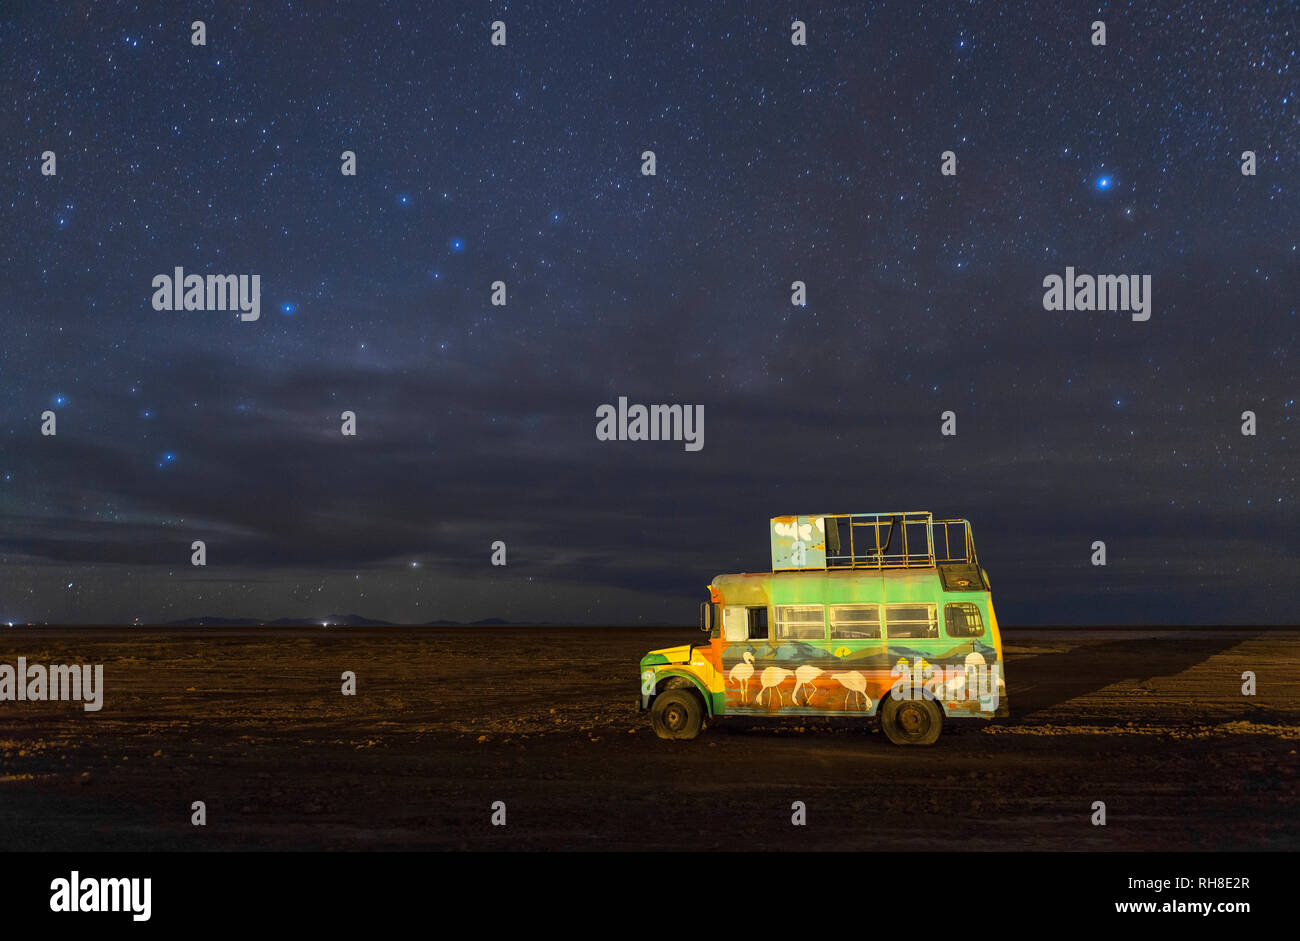 The beautiful night sky near the Uyuni Salt Flat (Salar de Uyuni) with a parked tour bus in the foreground, Bolivia, South America. Stock Photo